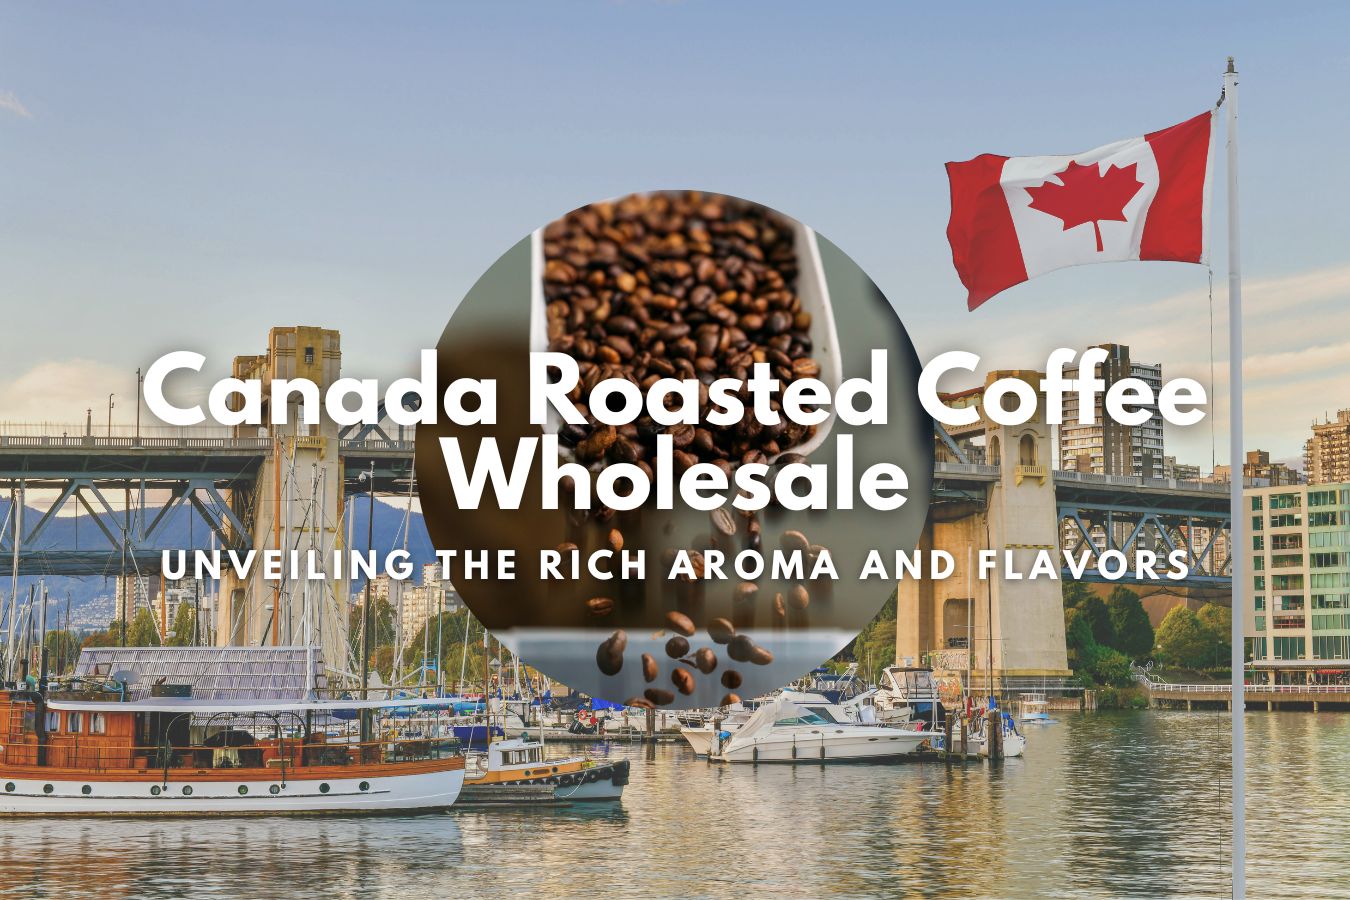 Canada Roasted Coffee Wholesale Unveiling the Rich Aroma and Flavors